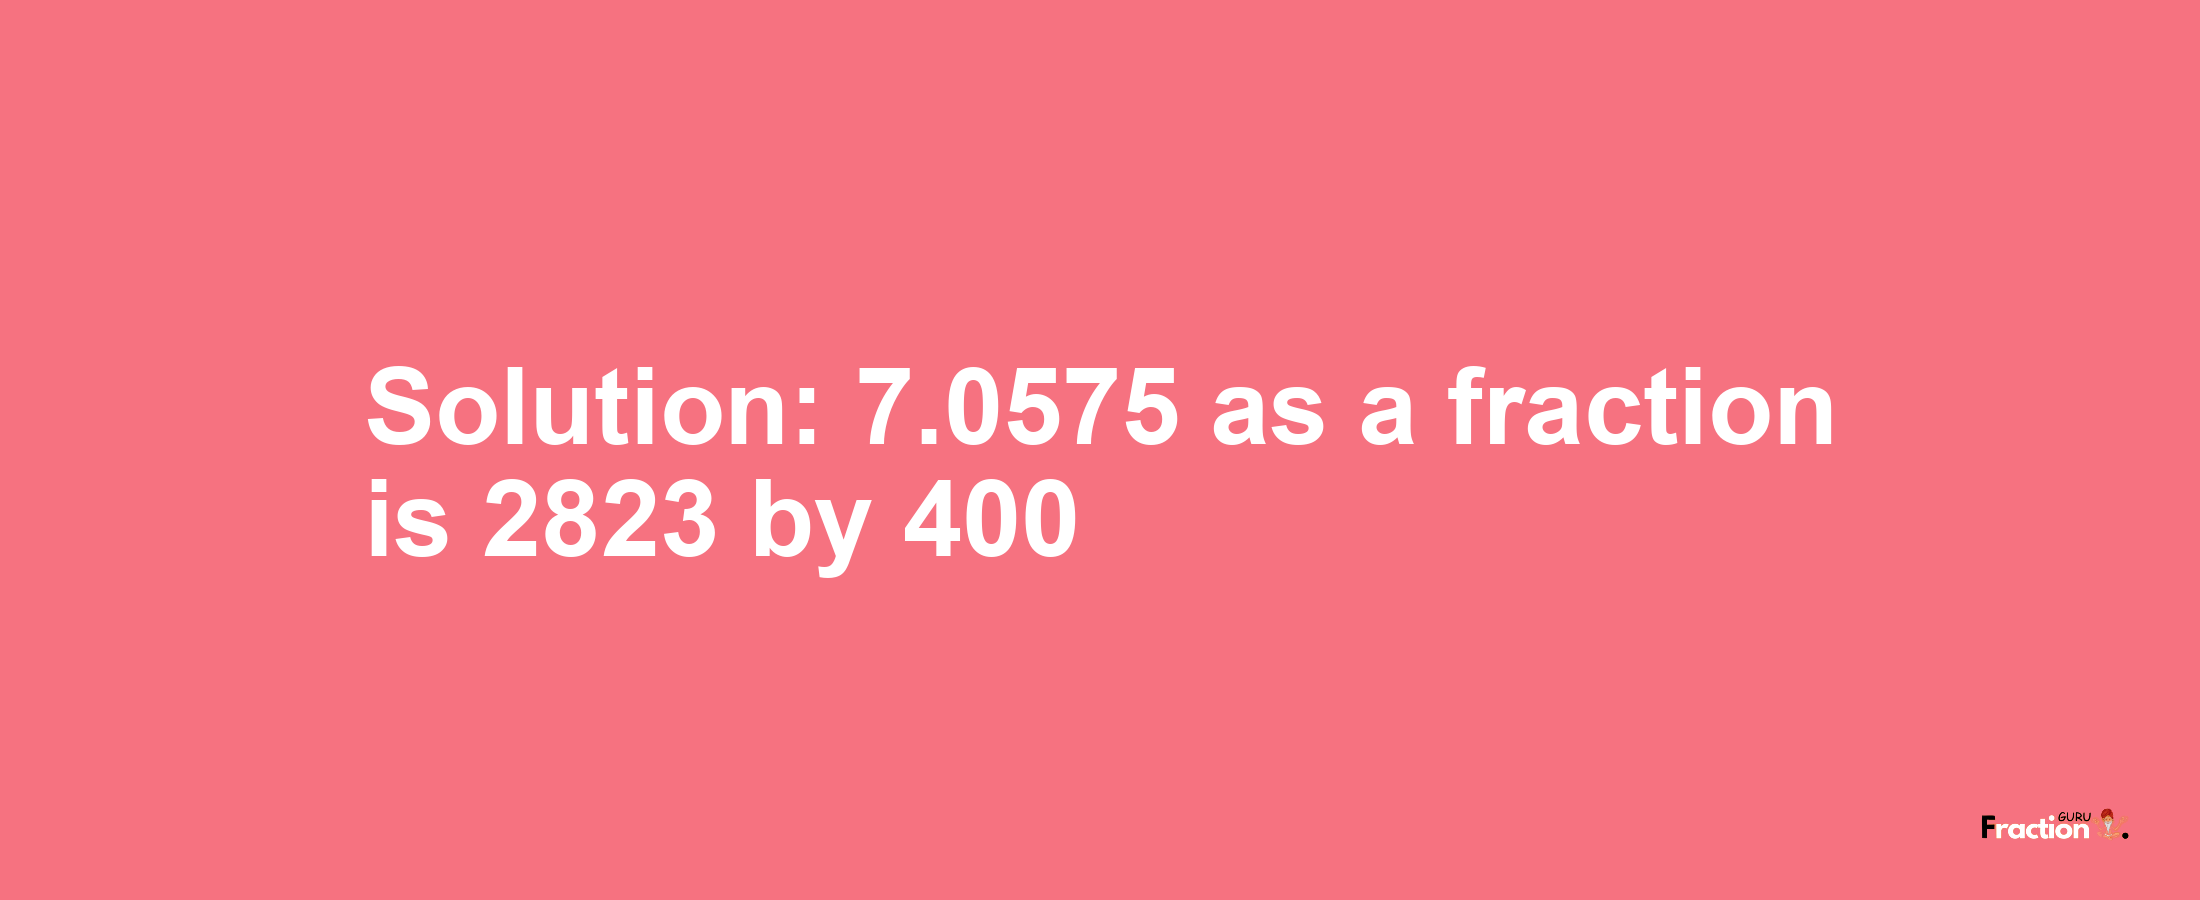 Solution:7.0575 as a fraction is 2823/400